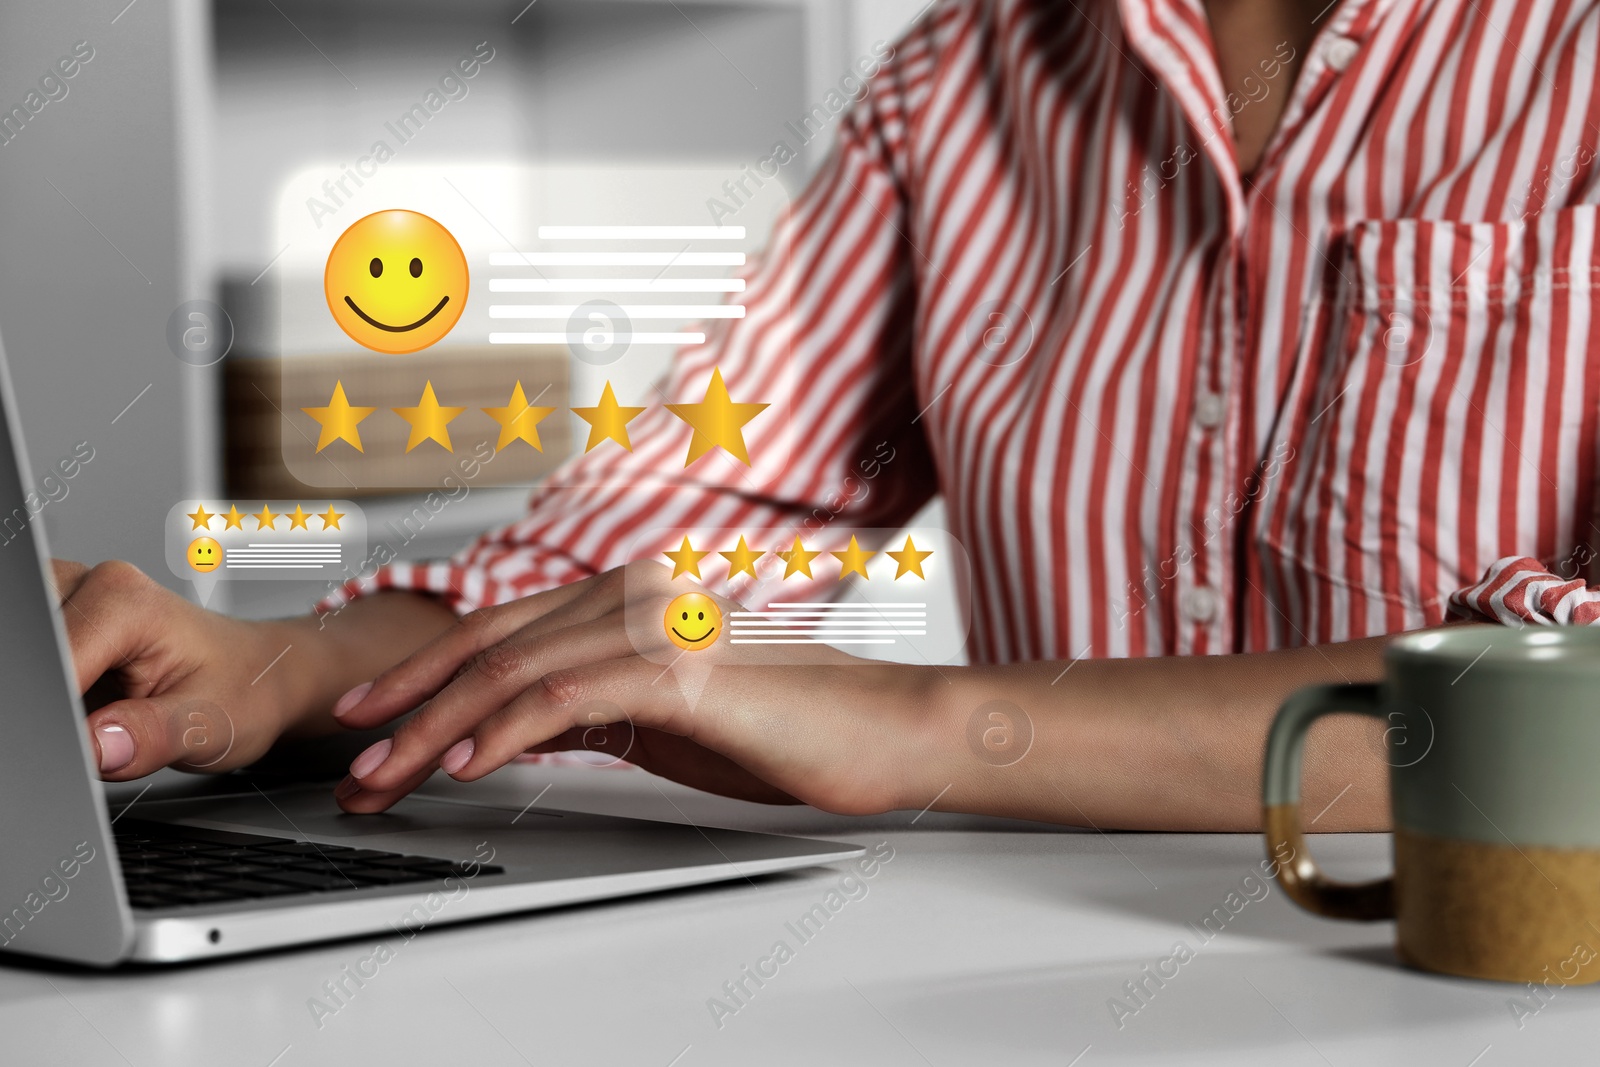 Image of Woman leaving service feedback using laptop at table, closeup. Stars and emoticons near device